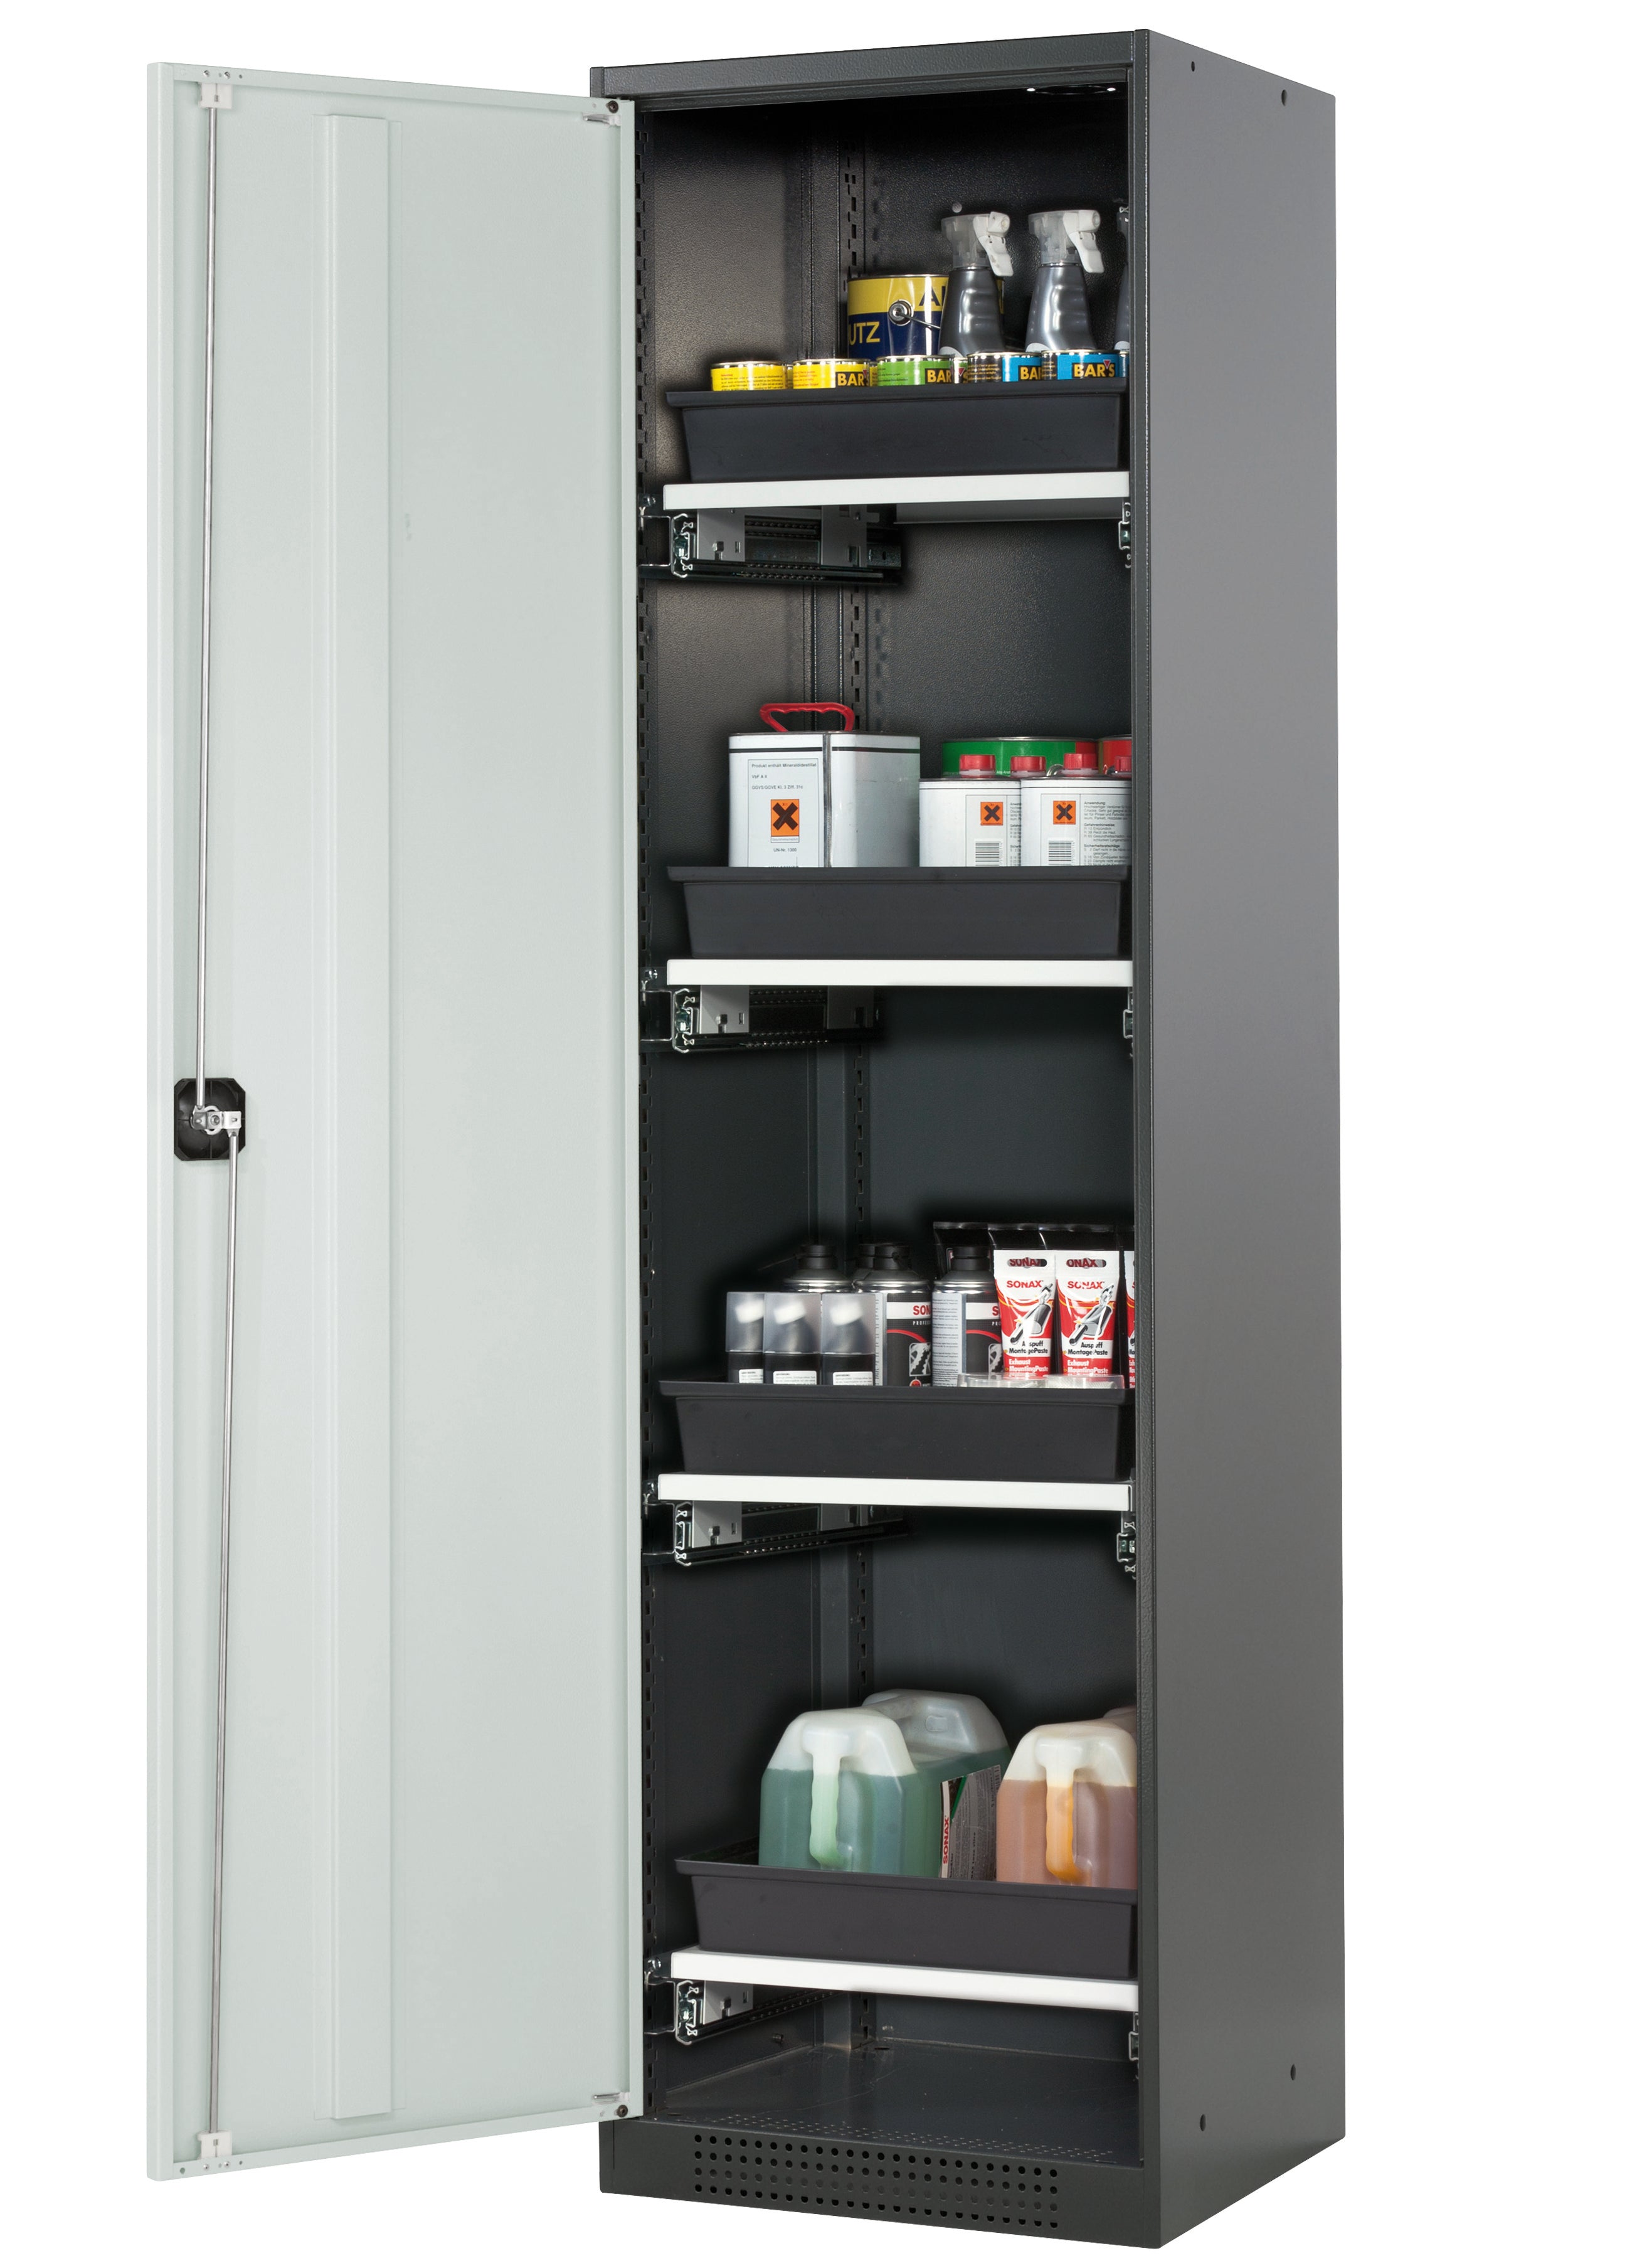 Chemical cabinet CS-CLASSIC model CS.195.054 in light gray RAL 7035 with 4x AbZ pull-out shelves (sheet steel/polypropylene)